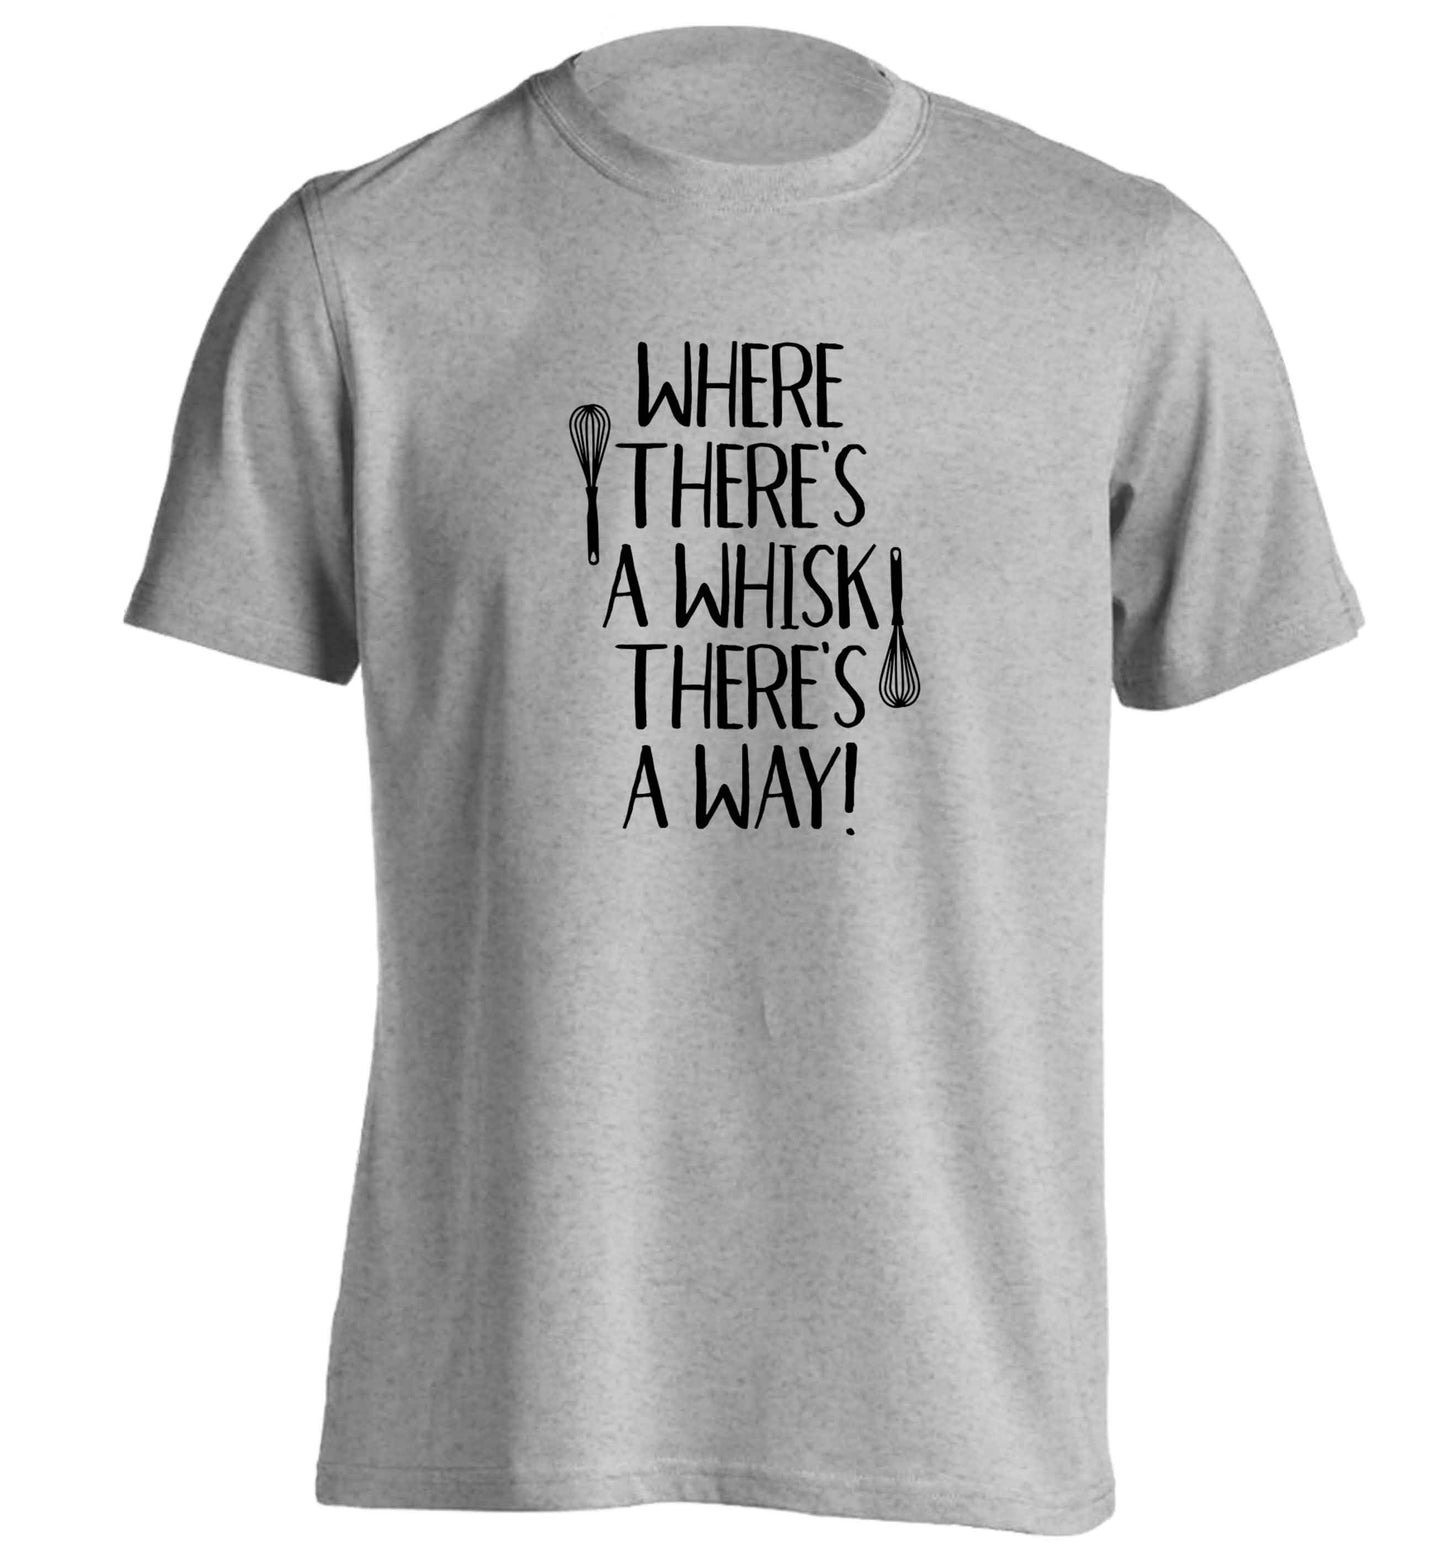 Where there's a whisk there's a way adults unisex grey Tshirt 2XL